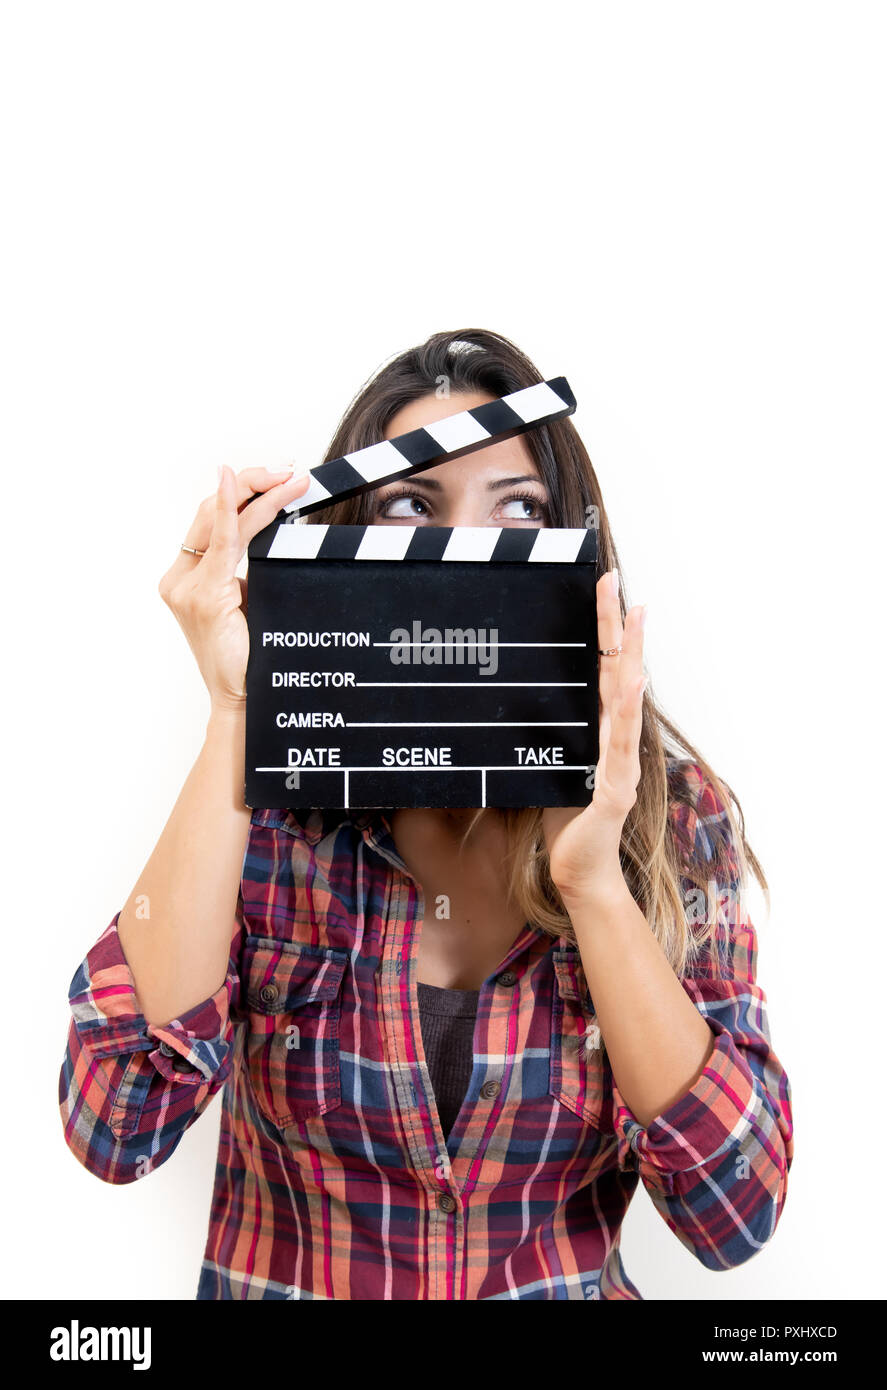 Waist up portrait of young beautiful woman holding film slate and looking at camera on white background Stock Photo